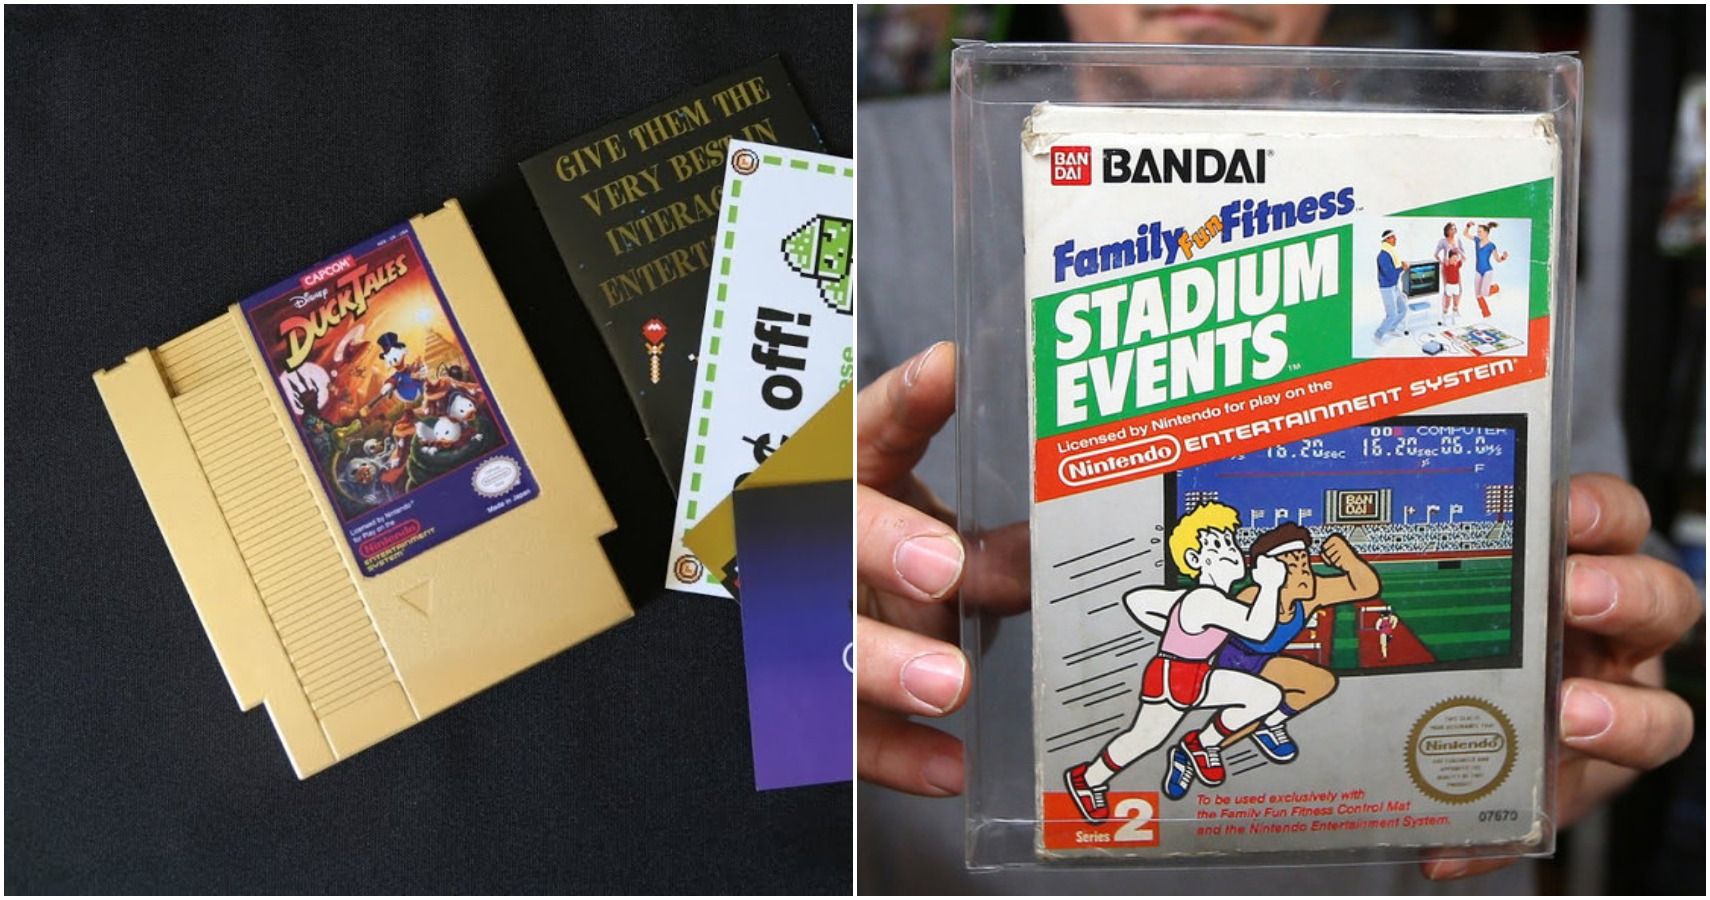 valuable nes games